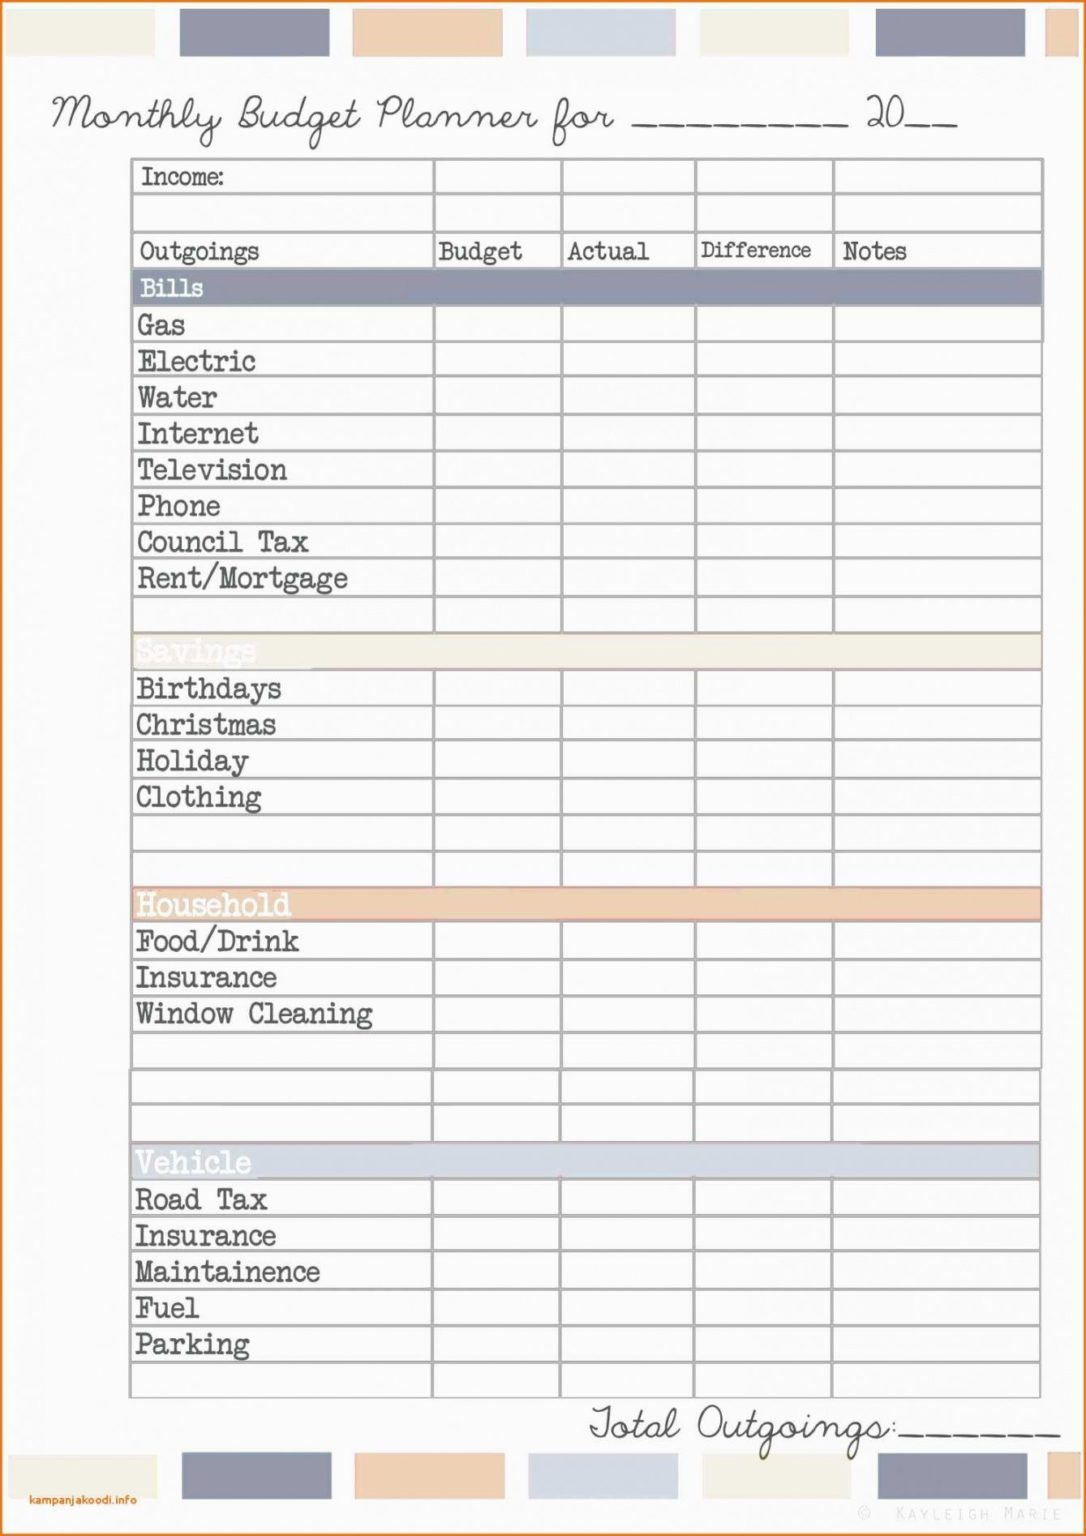 pantry-inventory-sheet-excel-templates